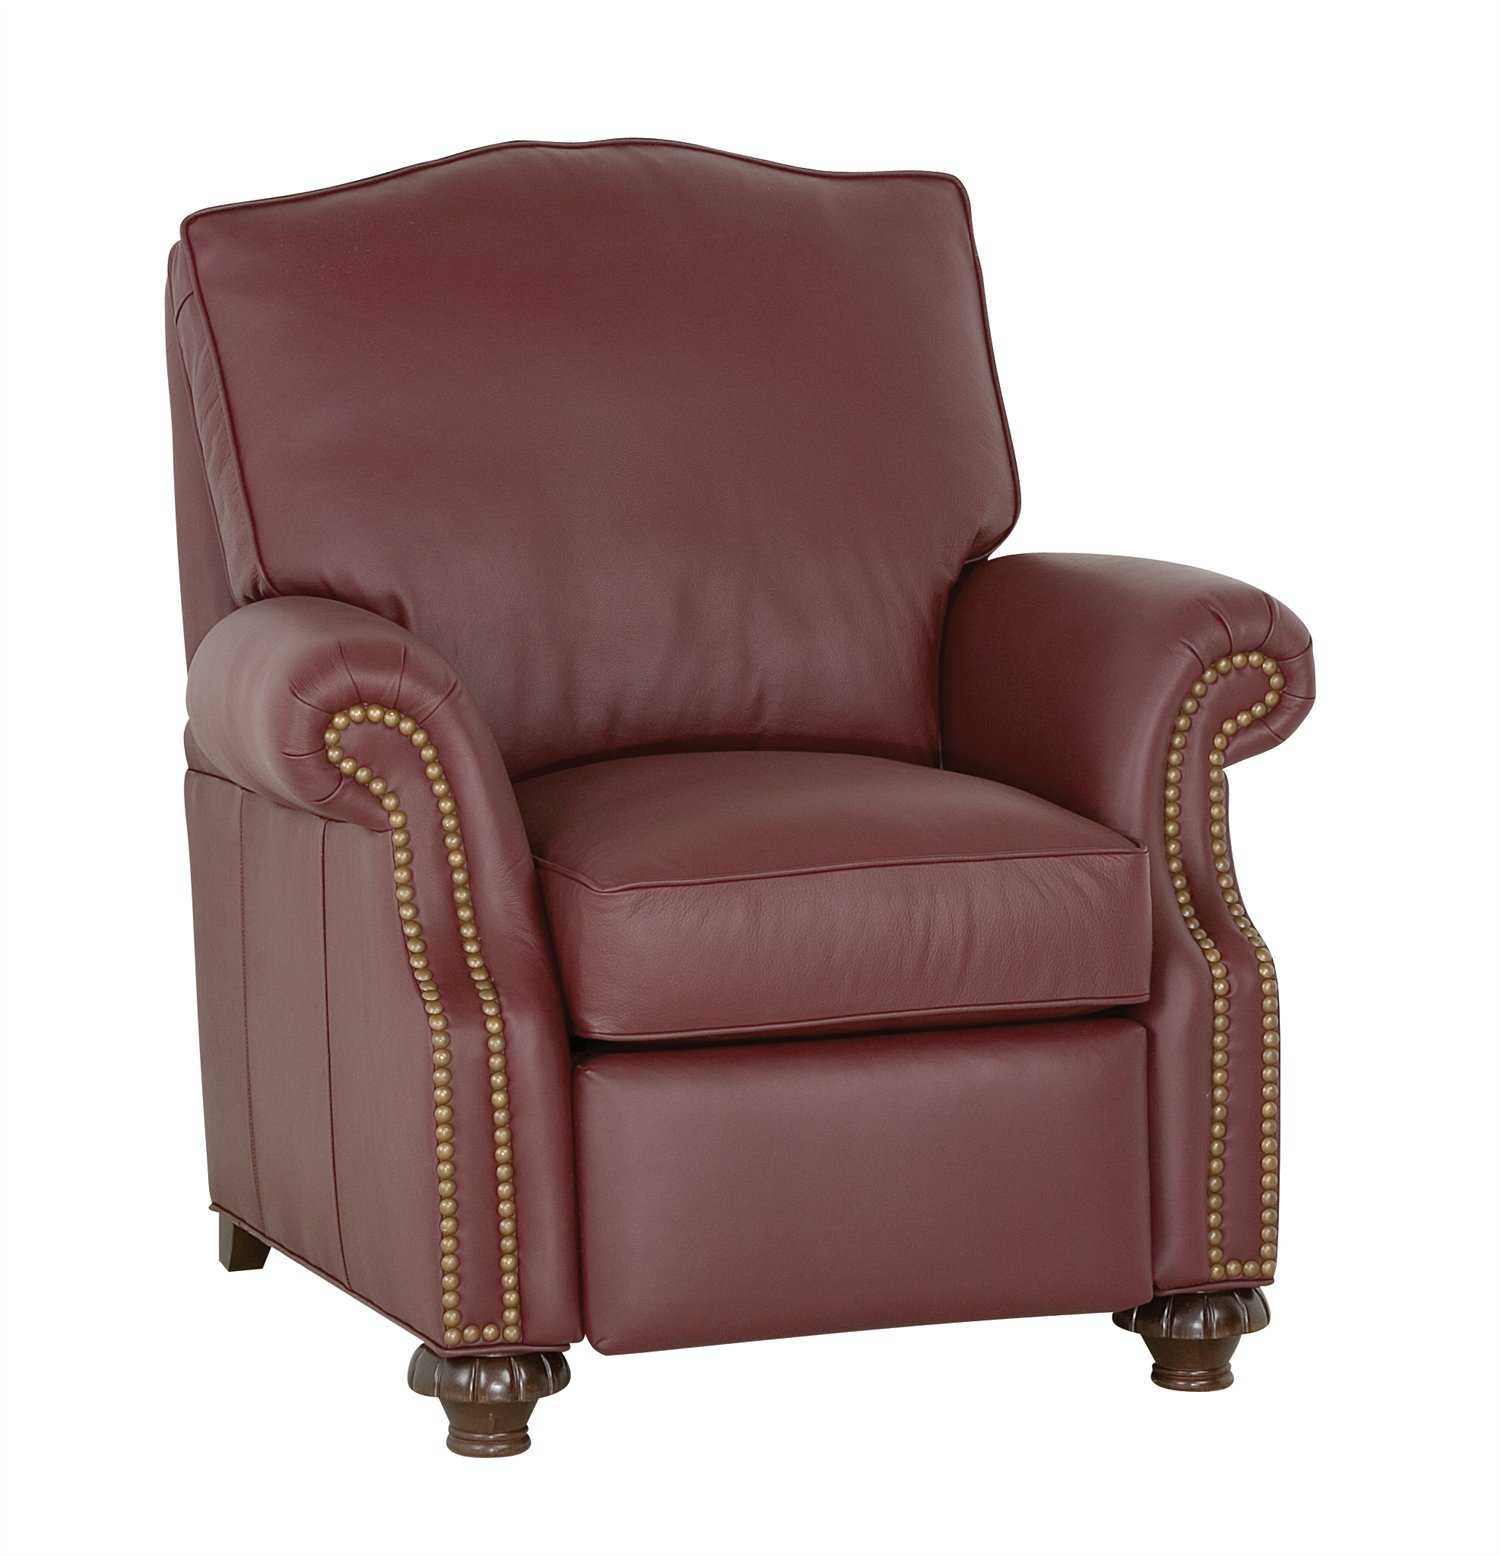 Classic Leather Whitley Low Leg Recliner Cl861llr